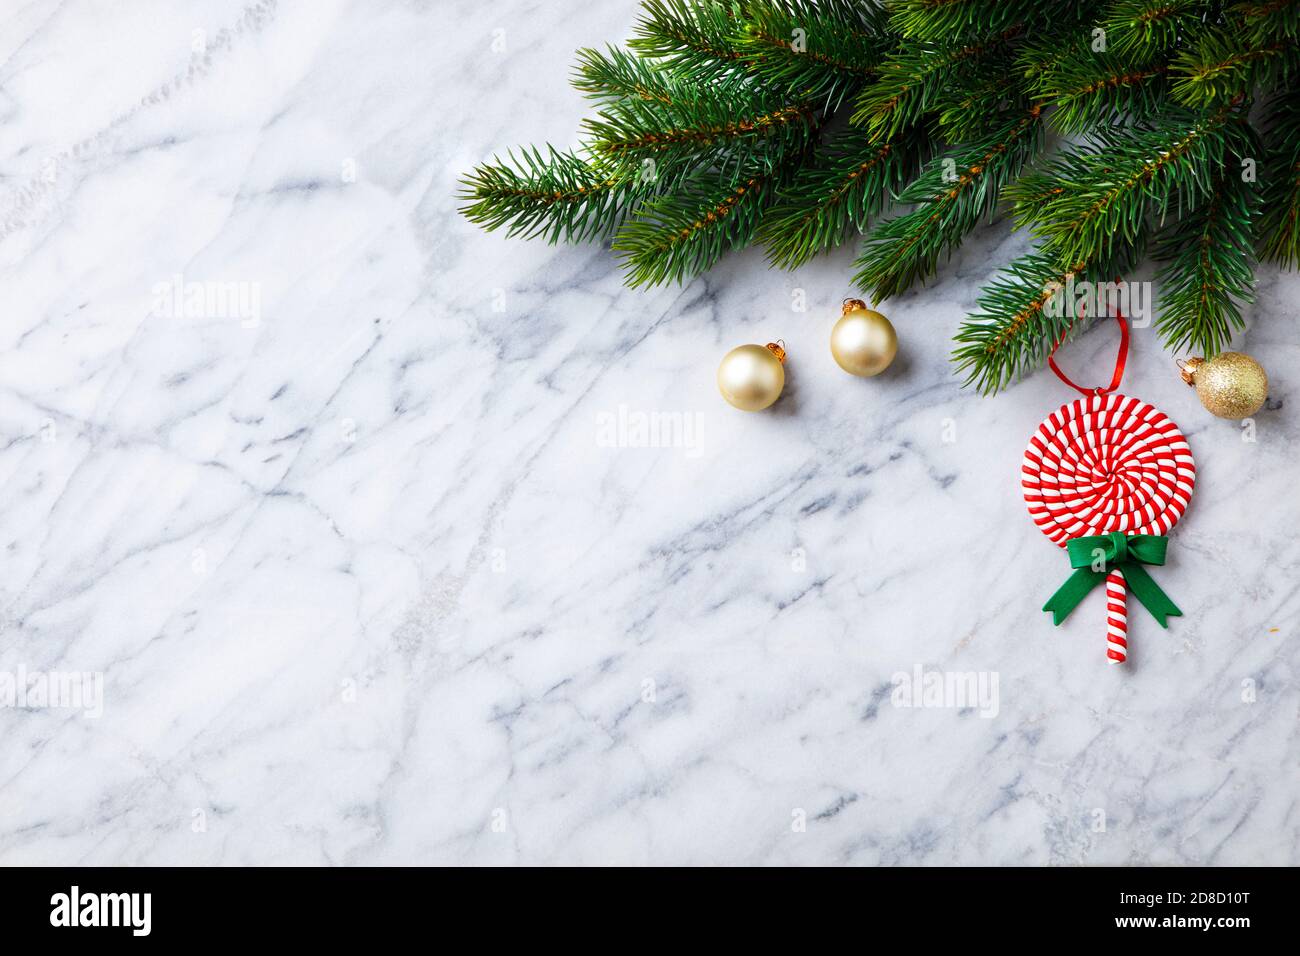 Christmas and New Year decoration, fir tree and ornaments. Marble background. Copy space. Top view. Stock Photo